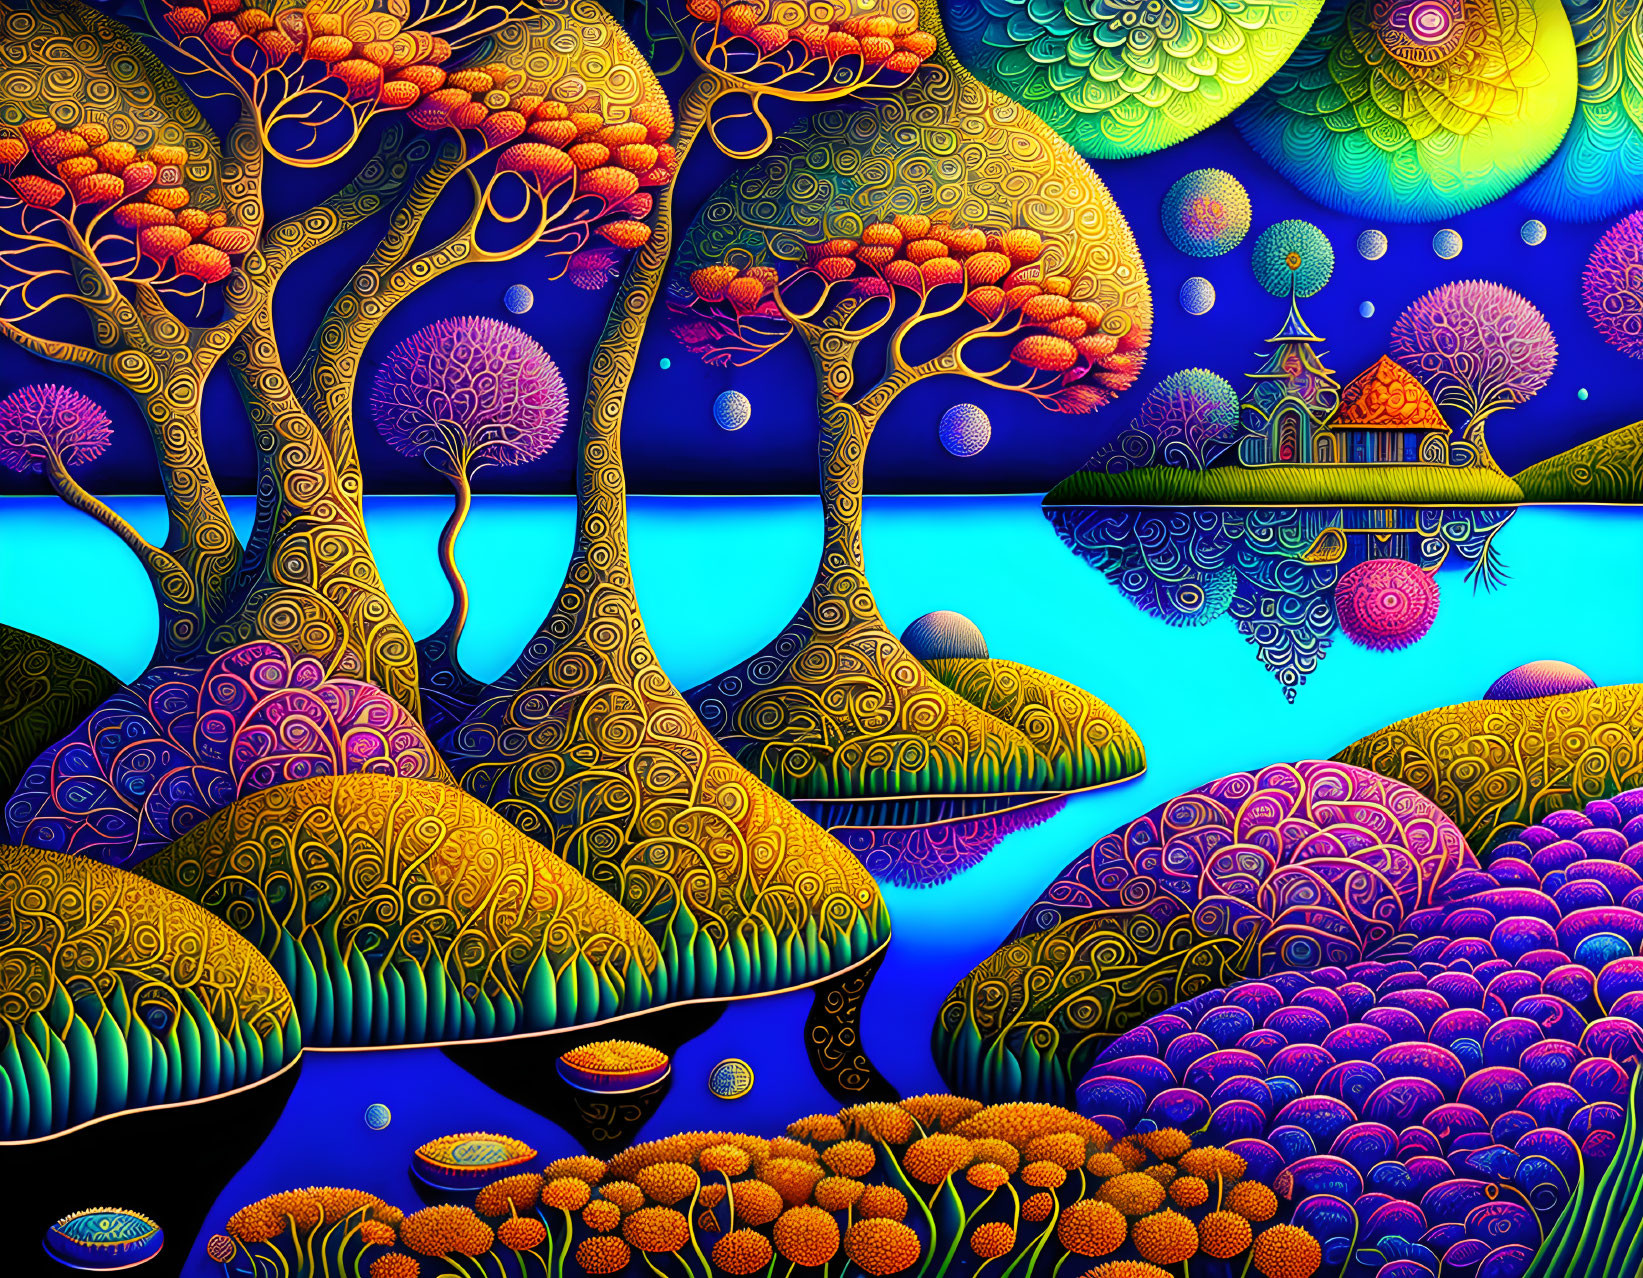 Colorful psychedelic landscape with stylized trees, reflective water, and ornate sky